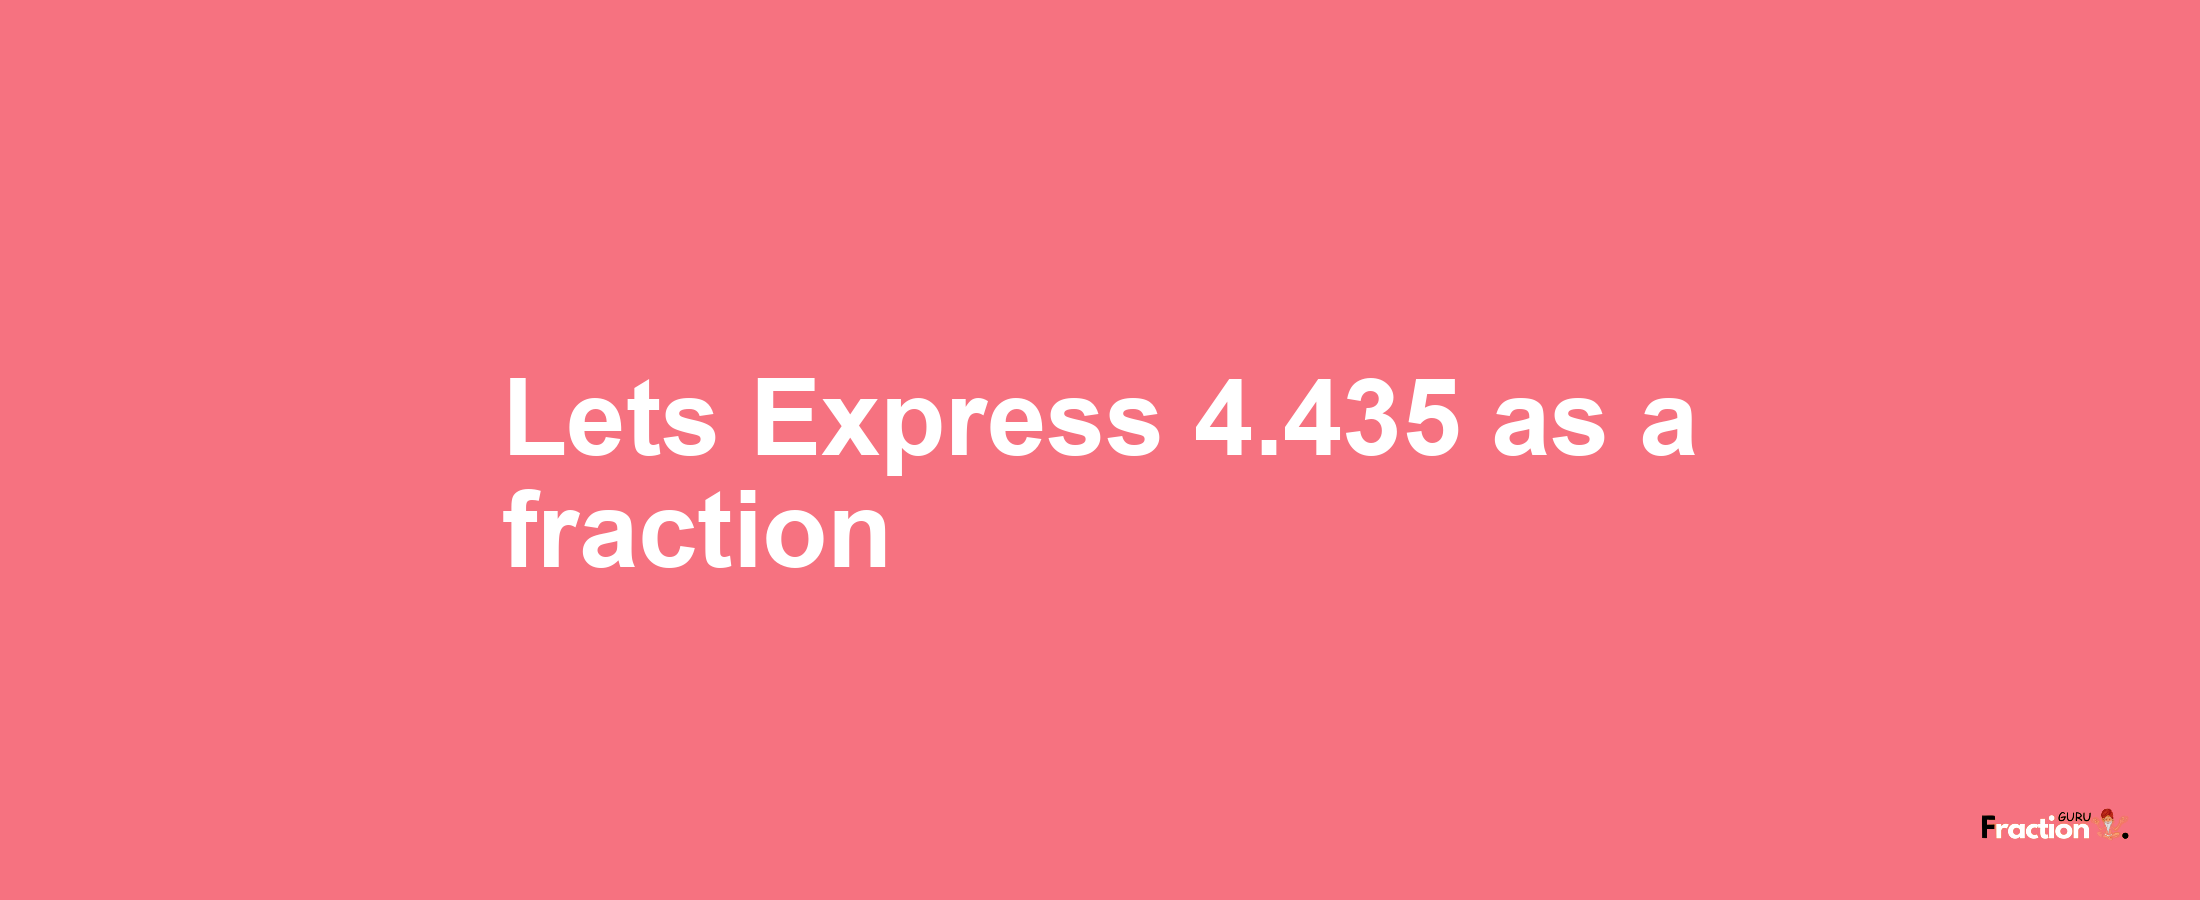 Lets Express 4.435 as afraction